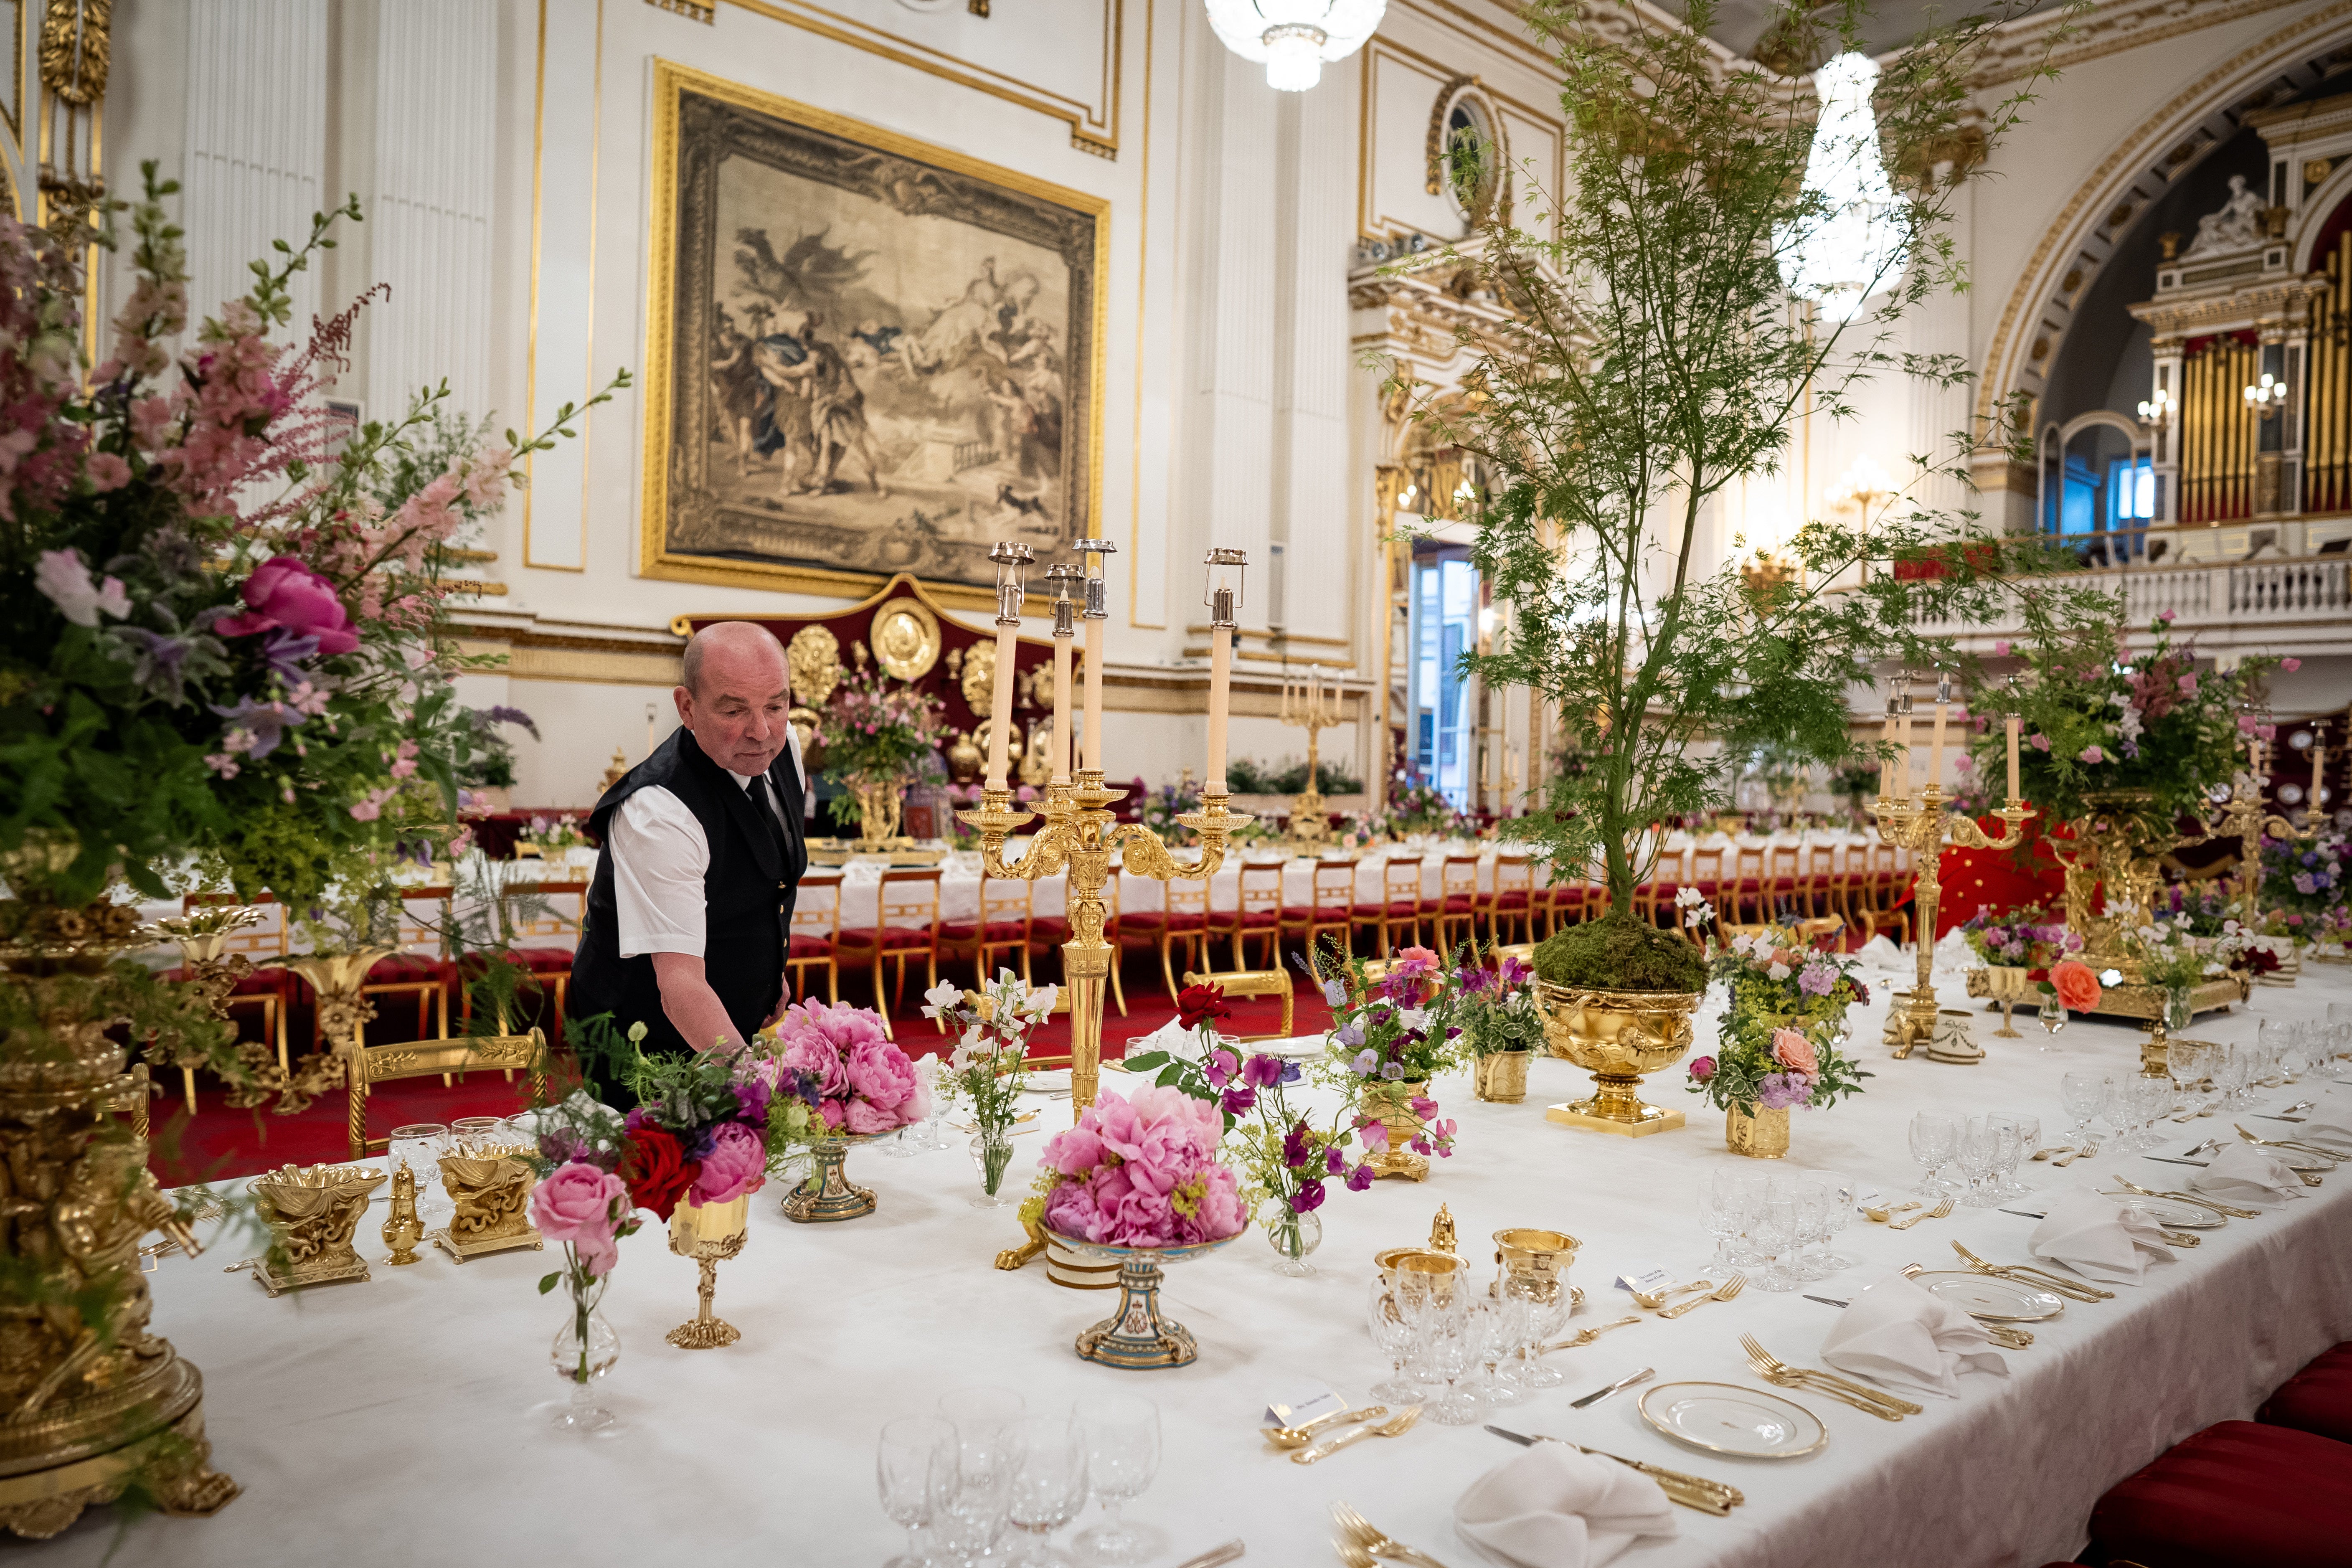 The finishing touches being applied to the tables in the Ballroom of Buckingham Palace before the state banquet (Aaron Chown/PA)